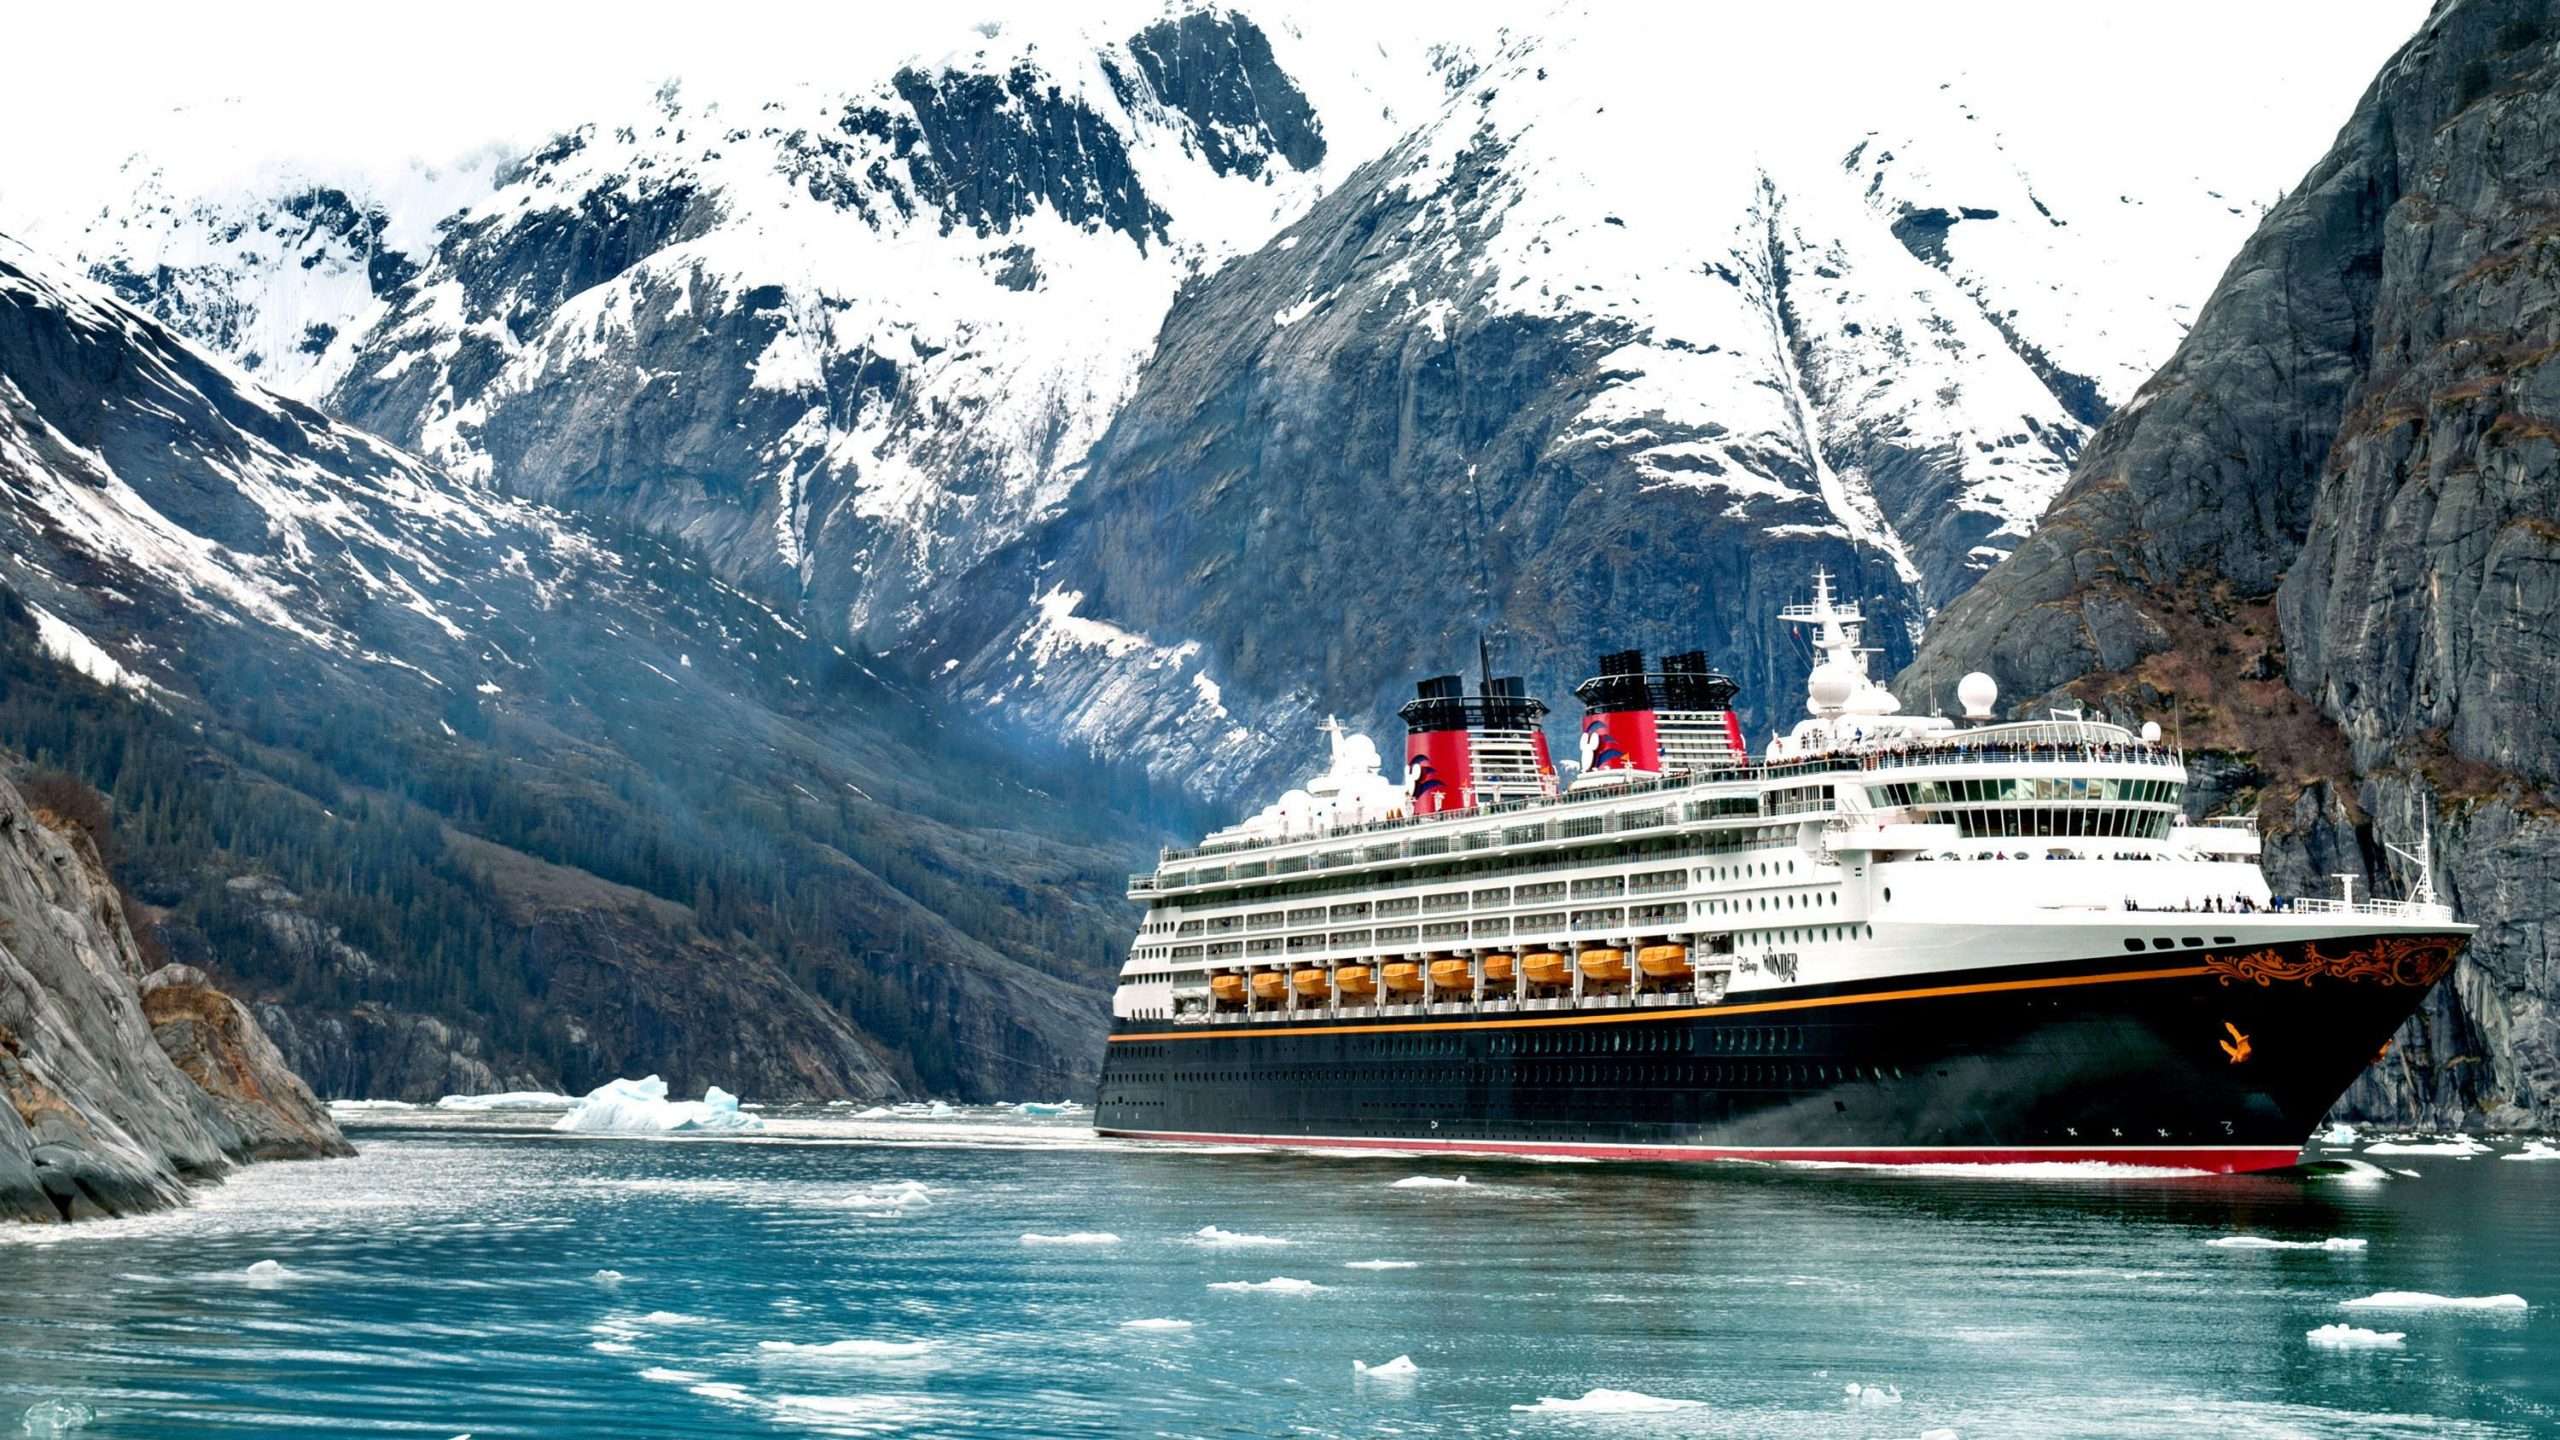 Top 8 best cruise ships going to Alaska in 2020